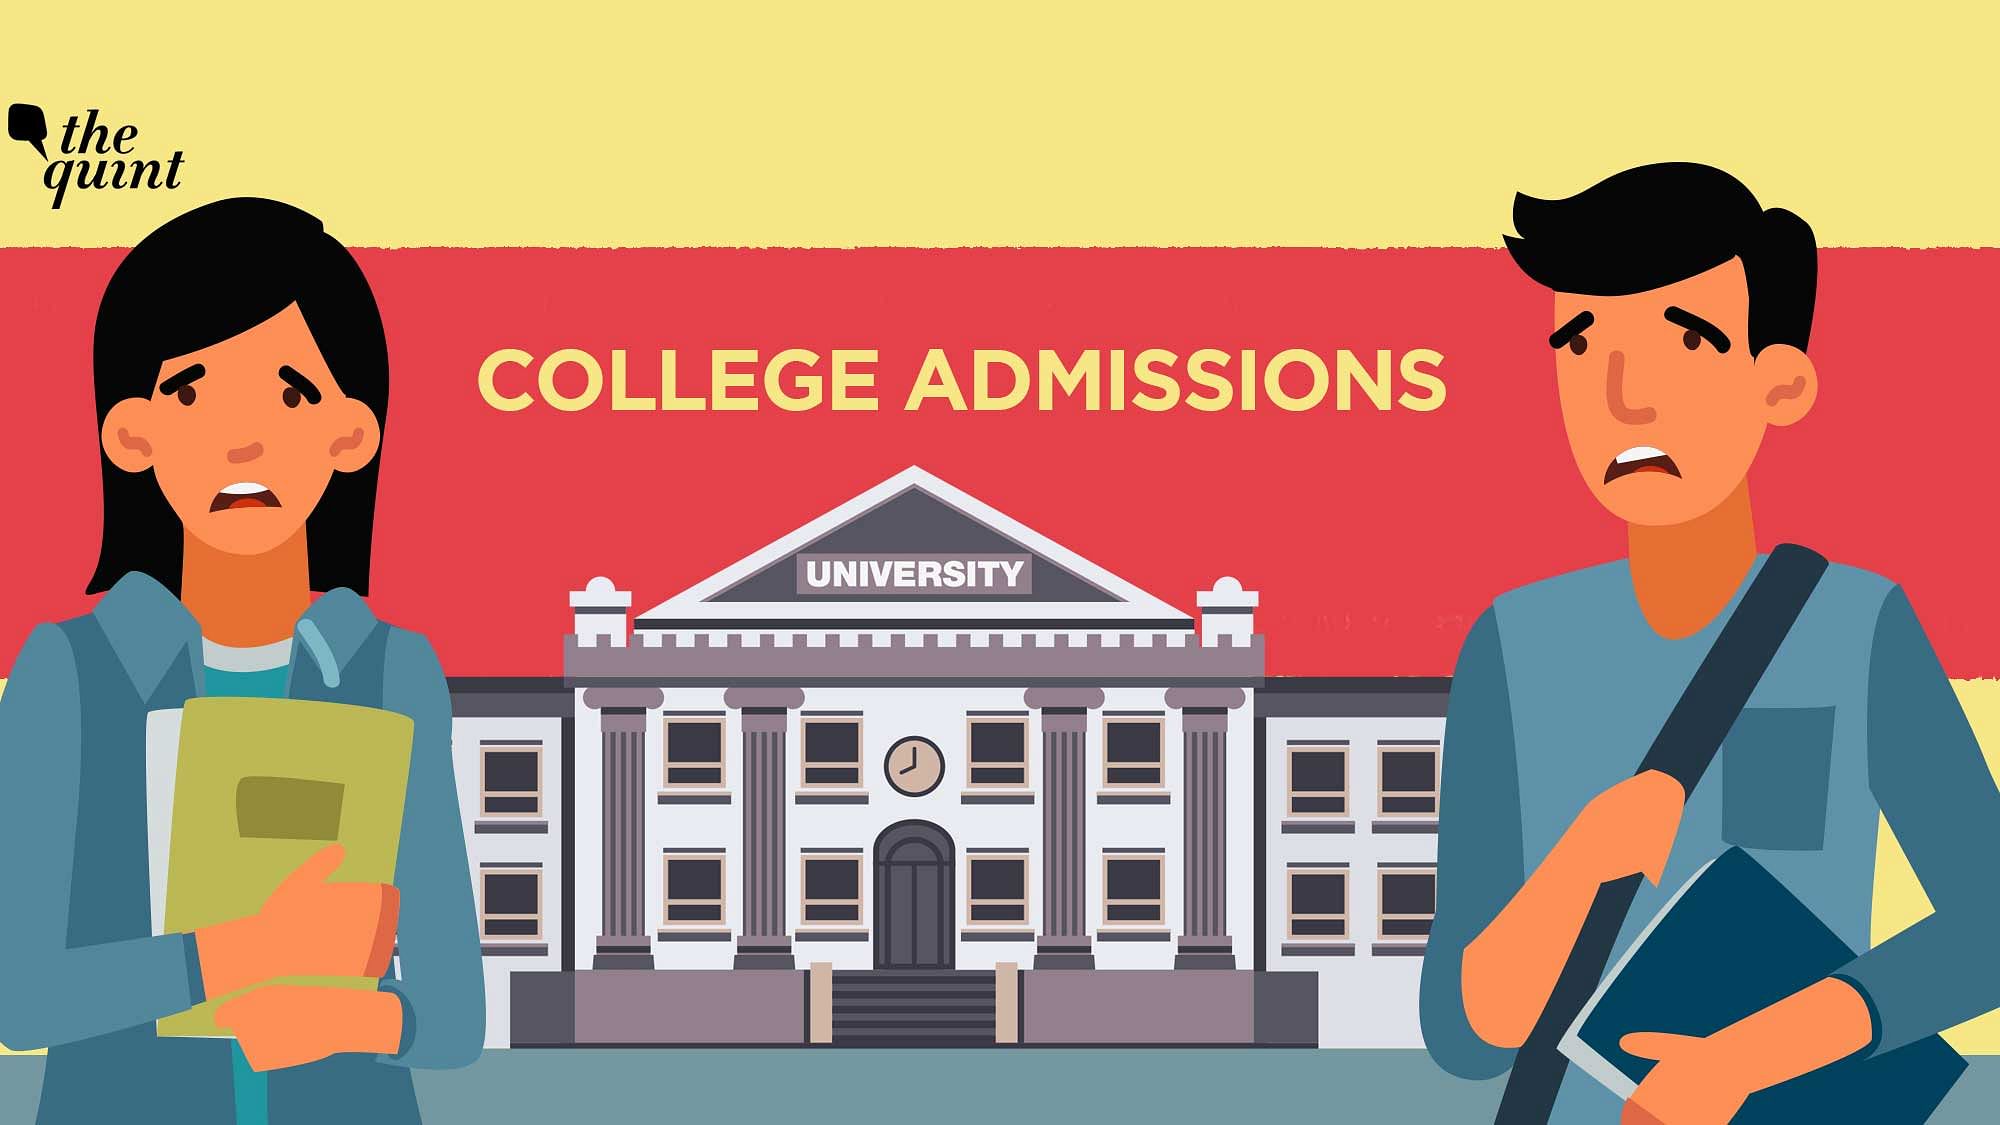 The recent high school graduates or technically “the students in transition” are facing the debilitating atmosphere not only from lockdown, deferment of board exams, but also because of mounting uncertainties regarding their college admissions.